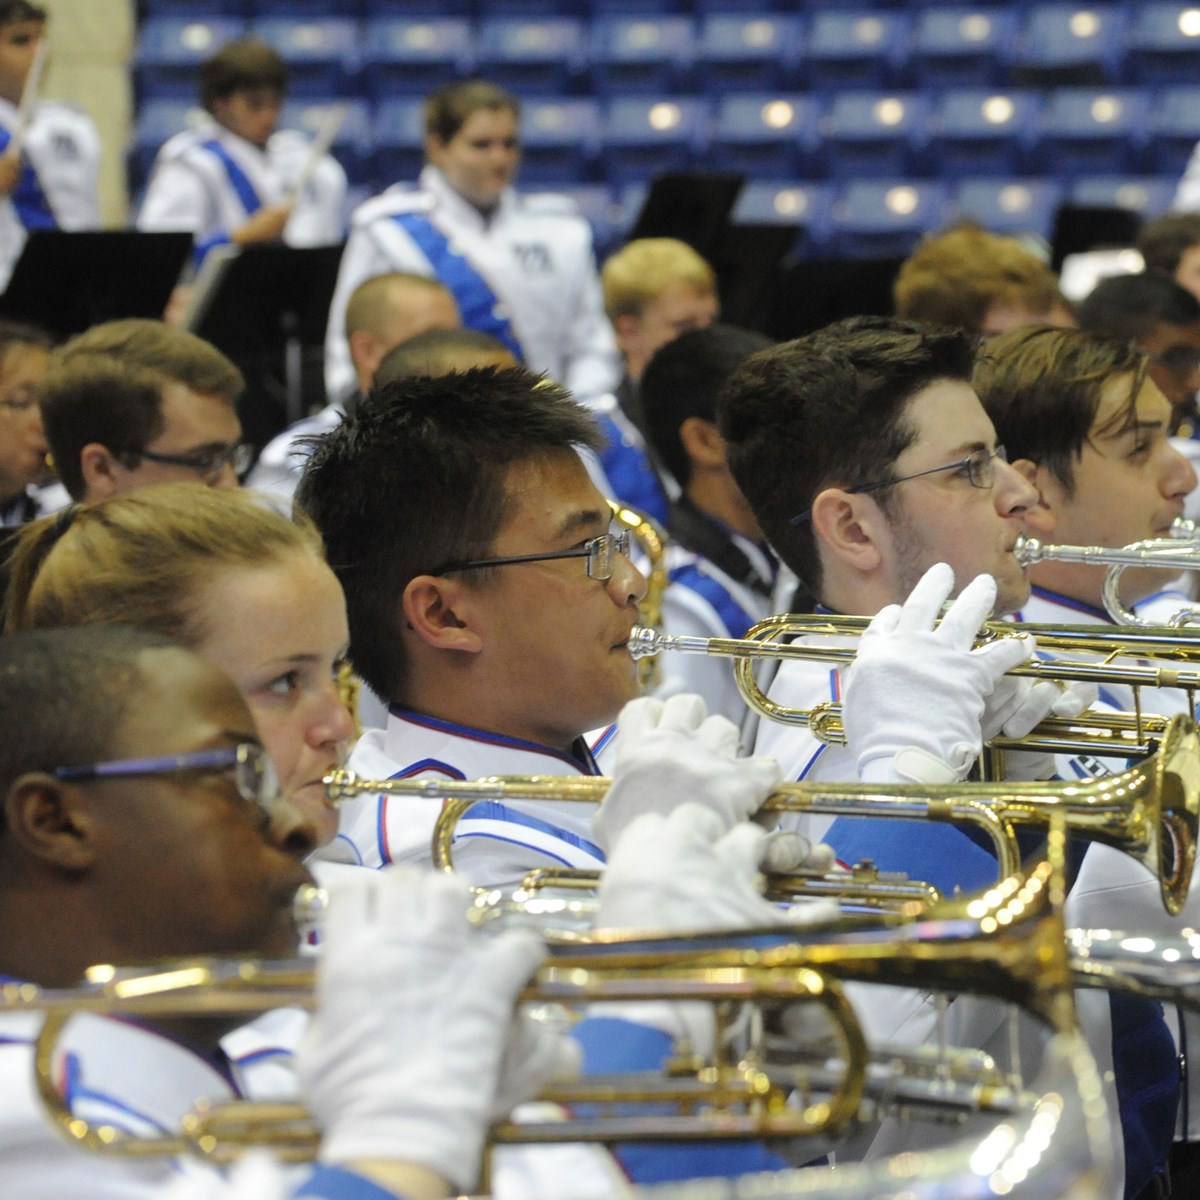 Students play trumpets in the band